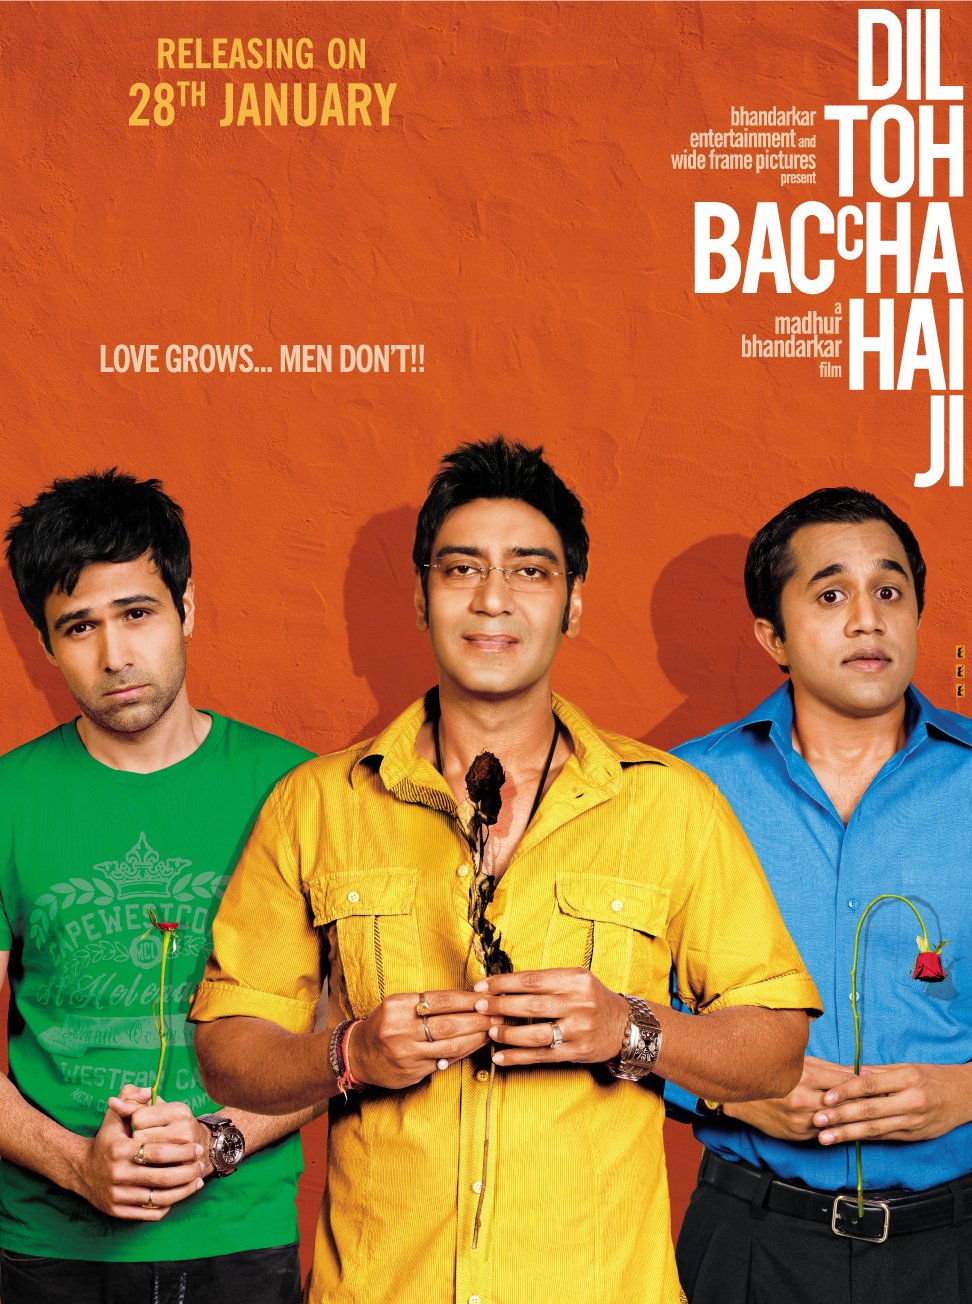 Extra Large Movie Poster Image for Dil Toh Baccha Hai Ji (#2 of 5)